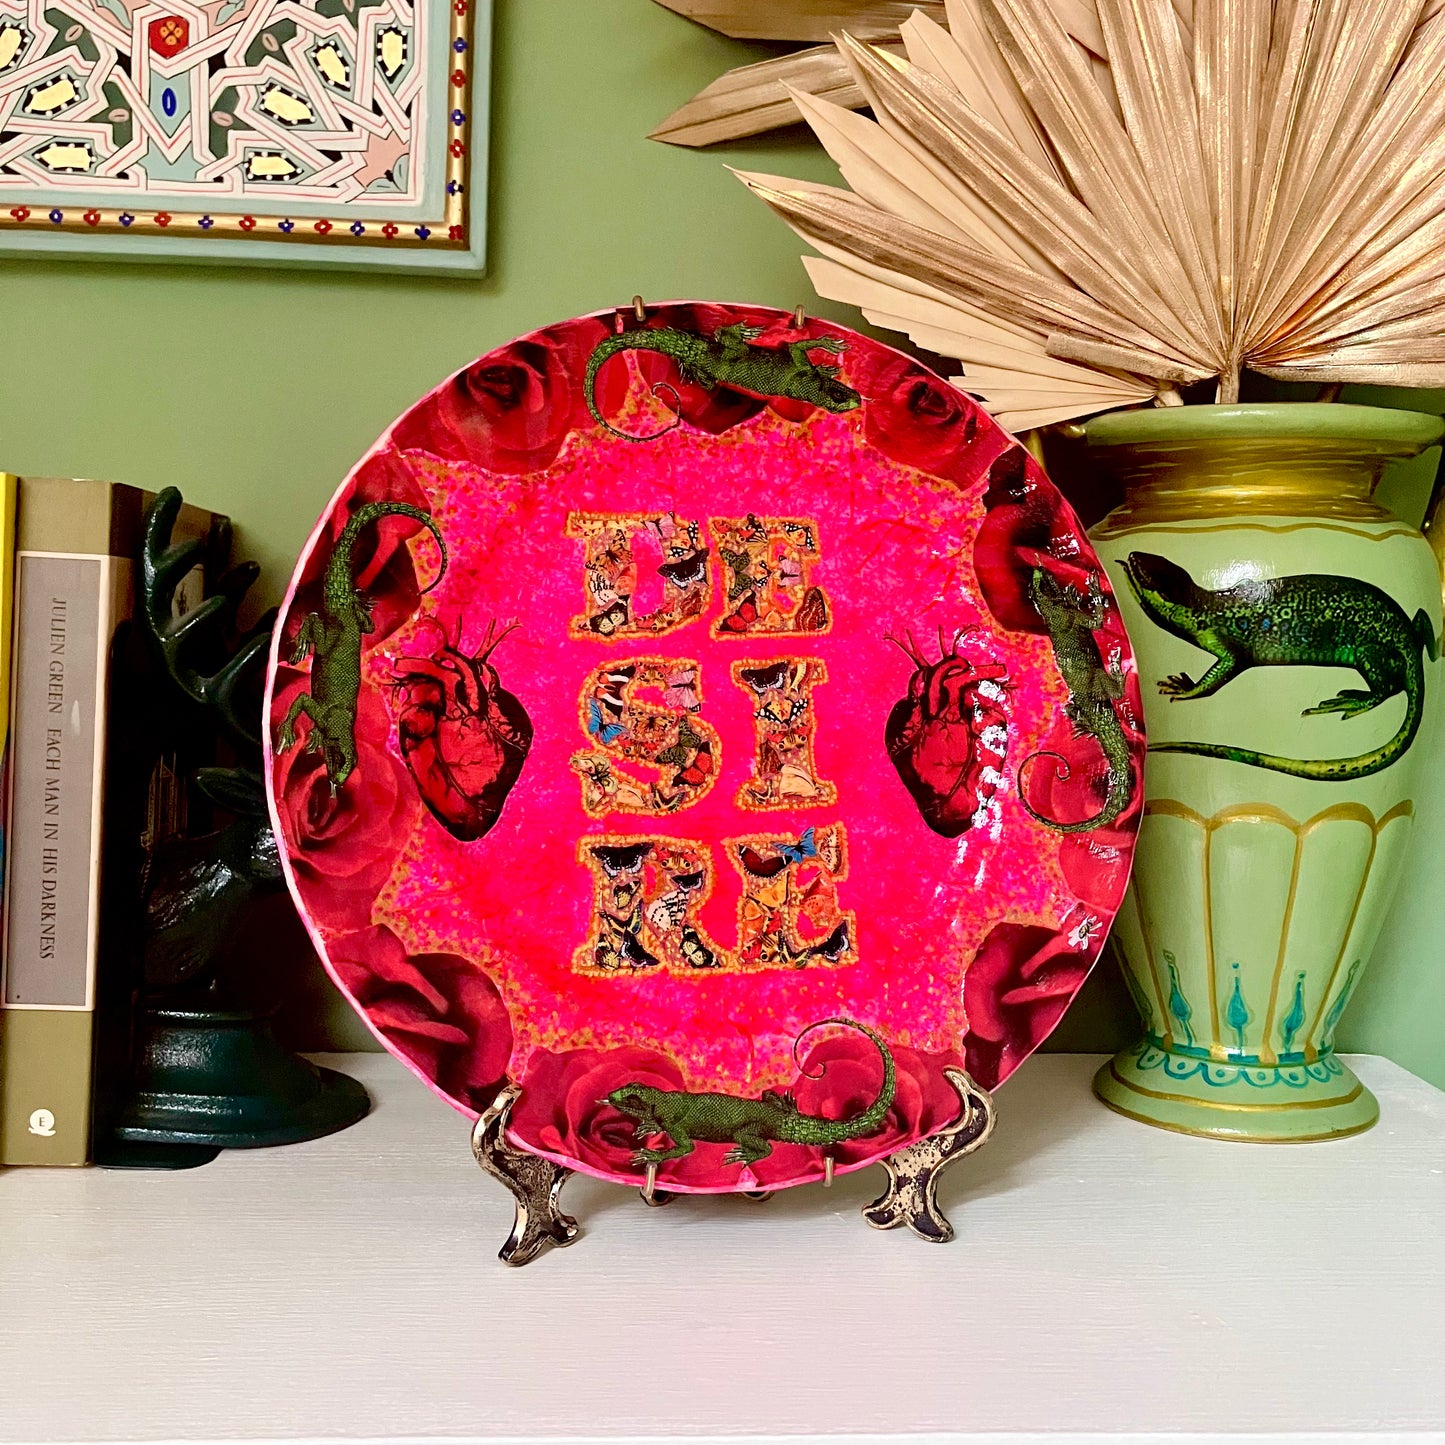 "Desire" Wall Plate by House of Frisson, featuring a collage with the word "desire" written with moths, and a frame of red roses and green lizards, on a hot pink background. Plate on a plate stand, resting on a shelf.